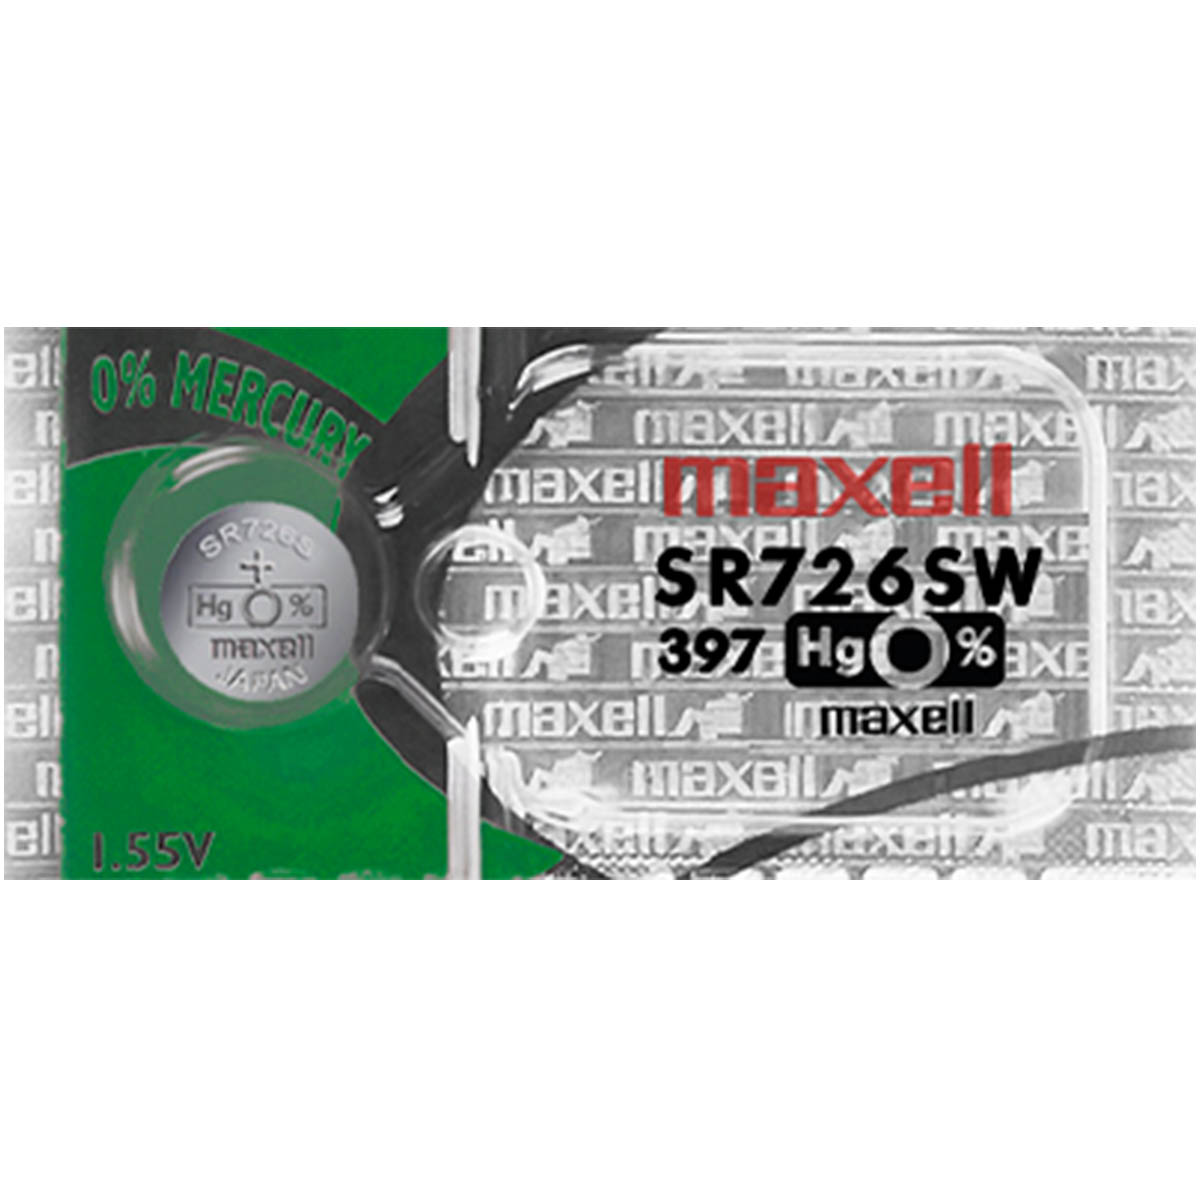 Maxell 397 Watch Battery (SR726SW ) Silver Oxide 1.55V